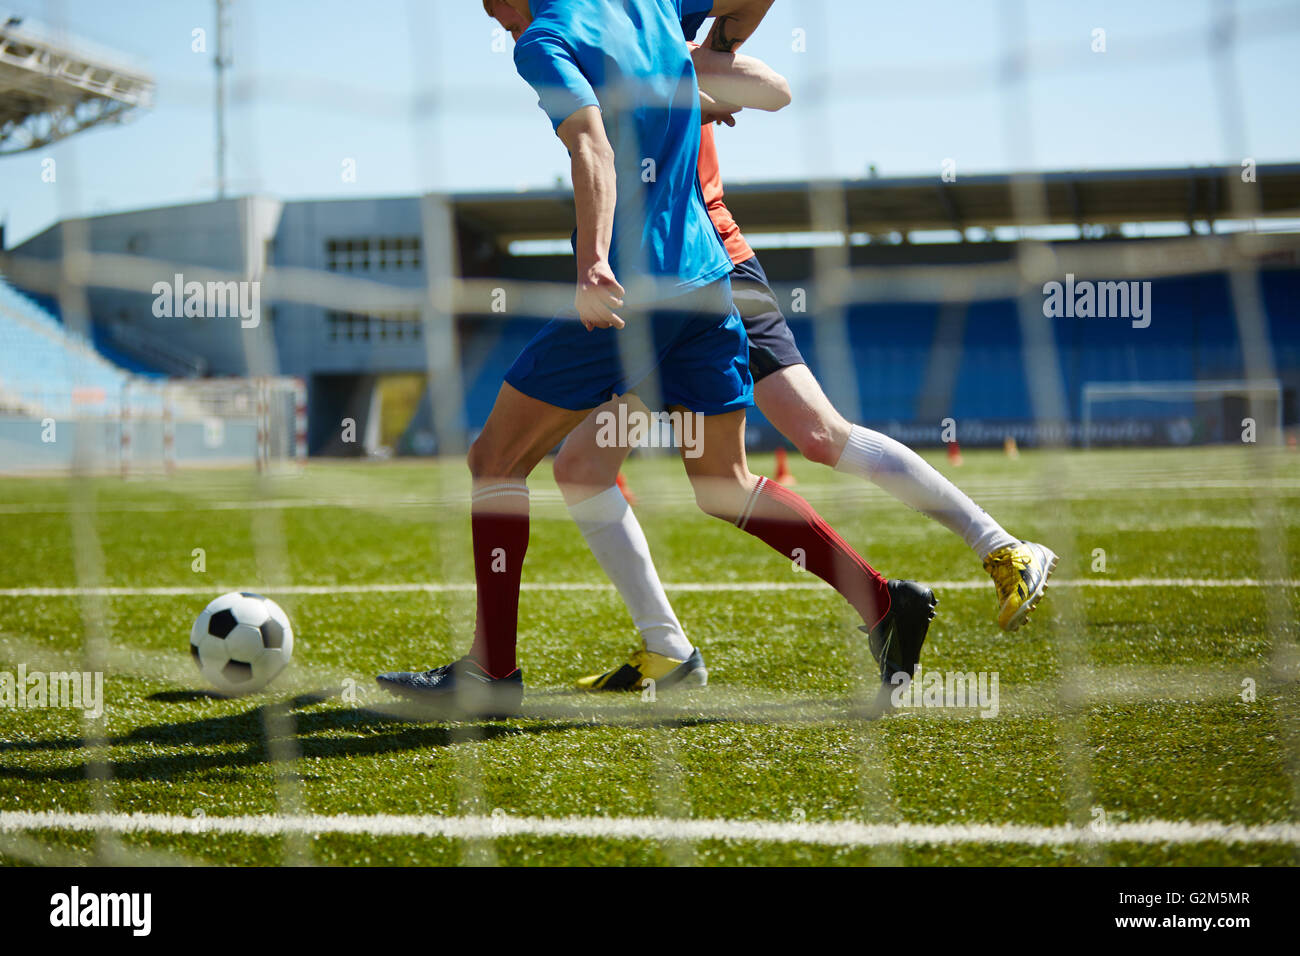 Game of football Stock Photo